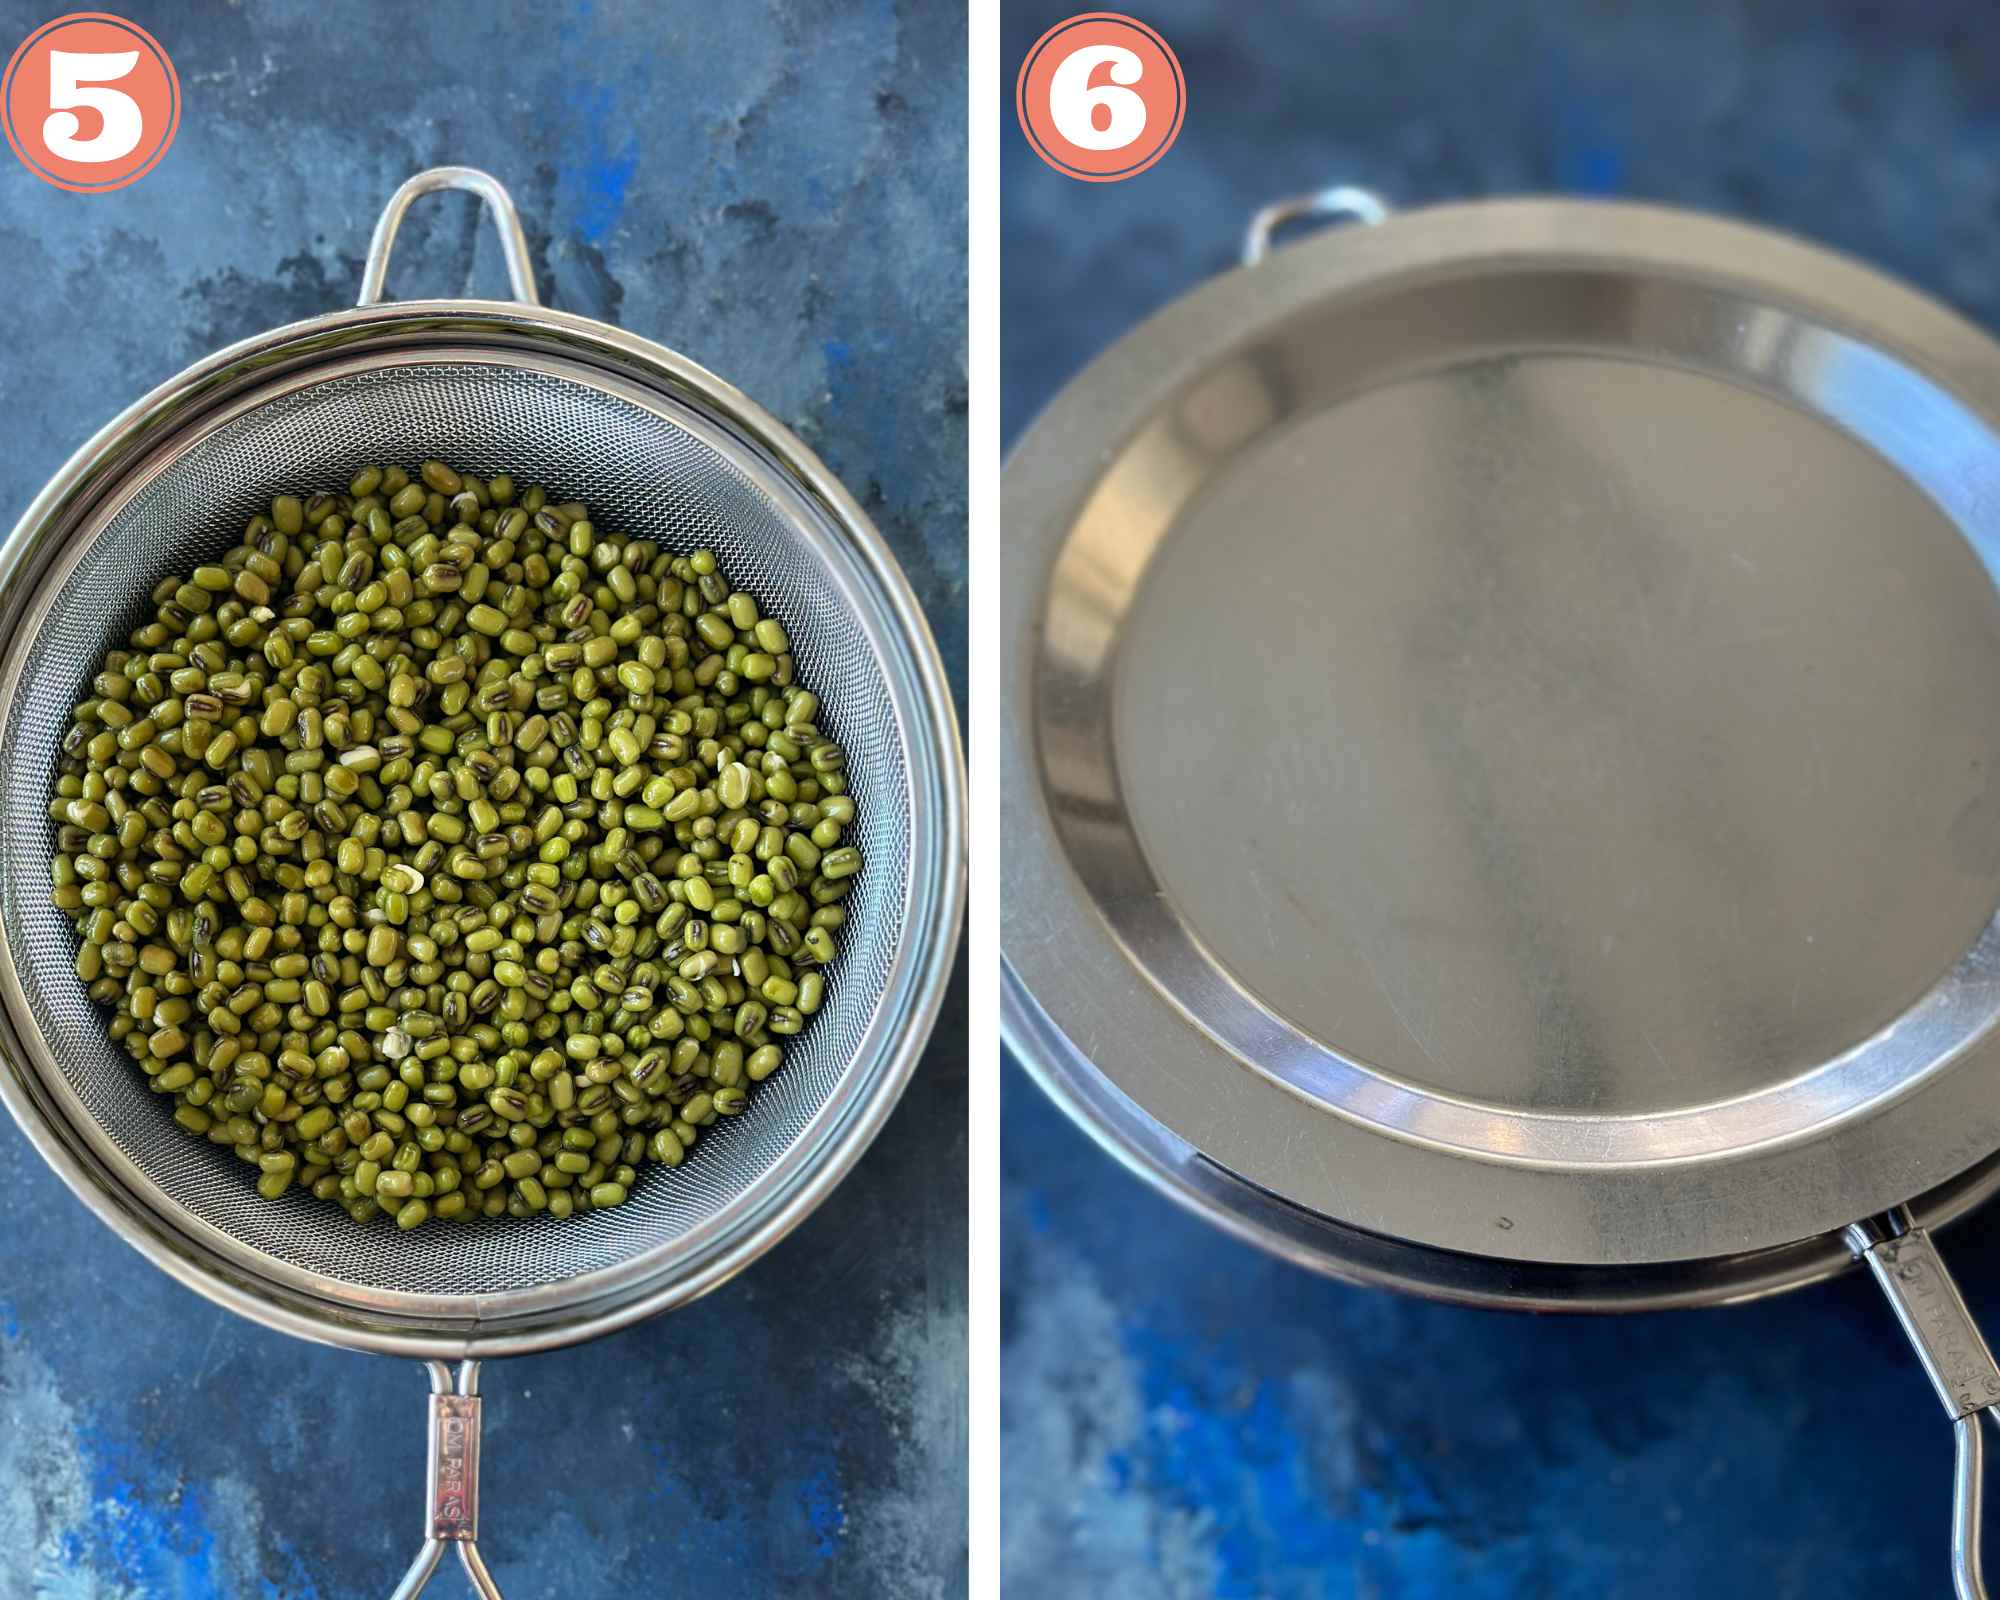 Collage steps to make moong sprouts; add the moong beans in a colander and cover. 